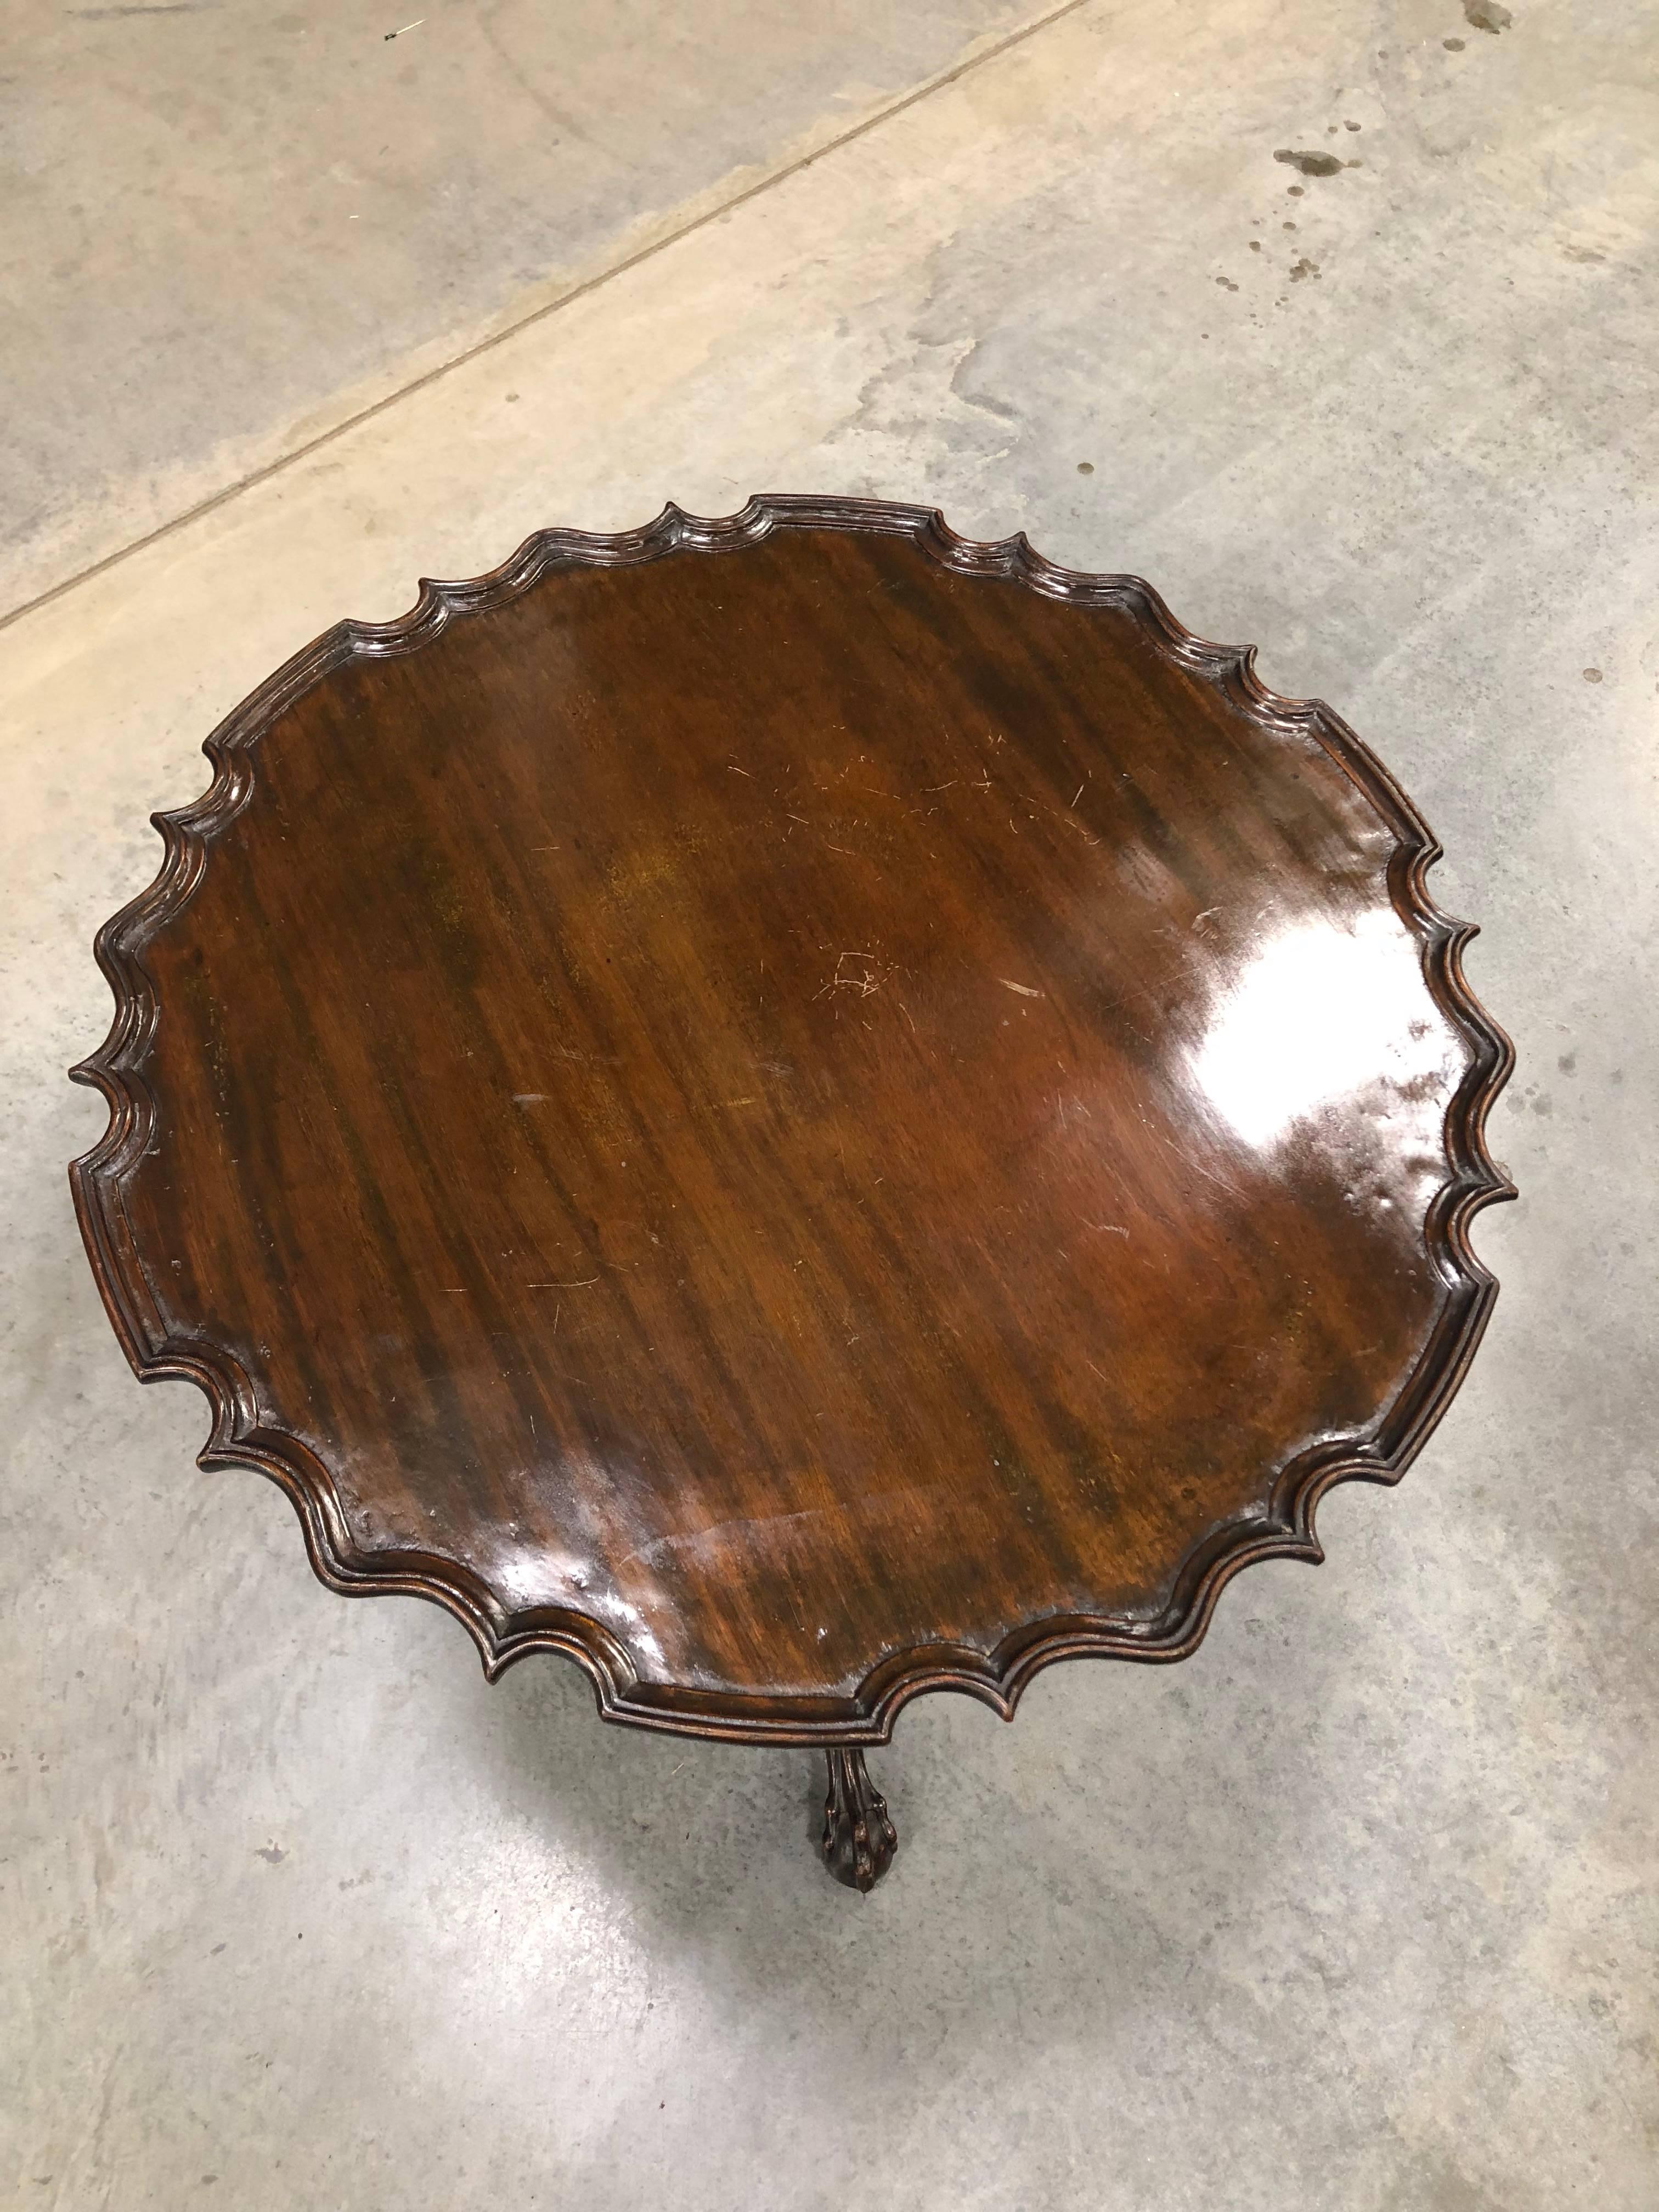 Chippendale pie crust tilt-top table with carved urn and fluted shaft ball claw feet
Nice historic surface and color diminutive size, circa 1770.